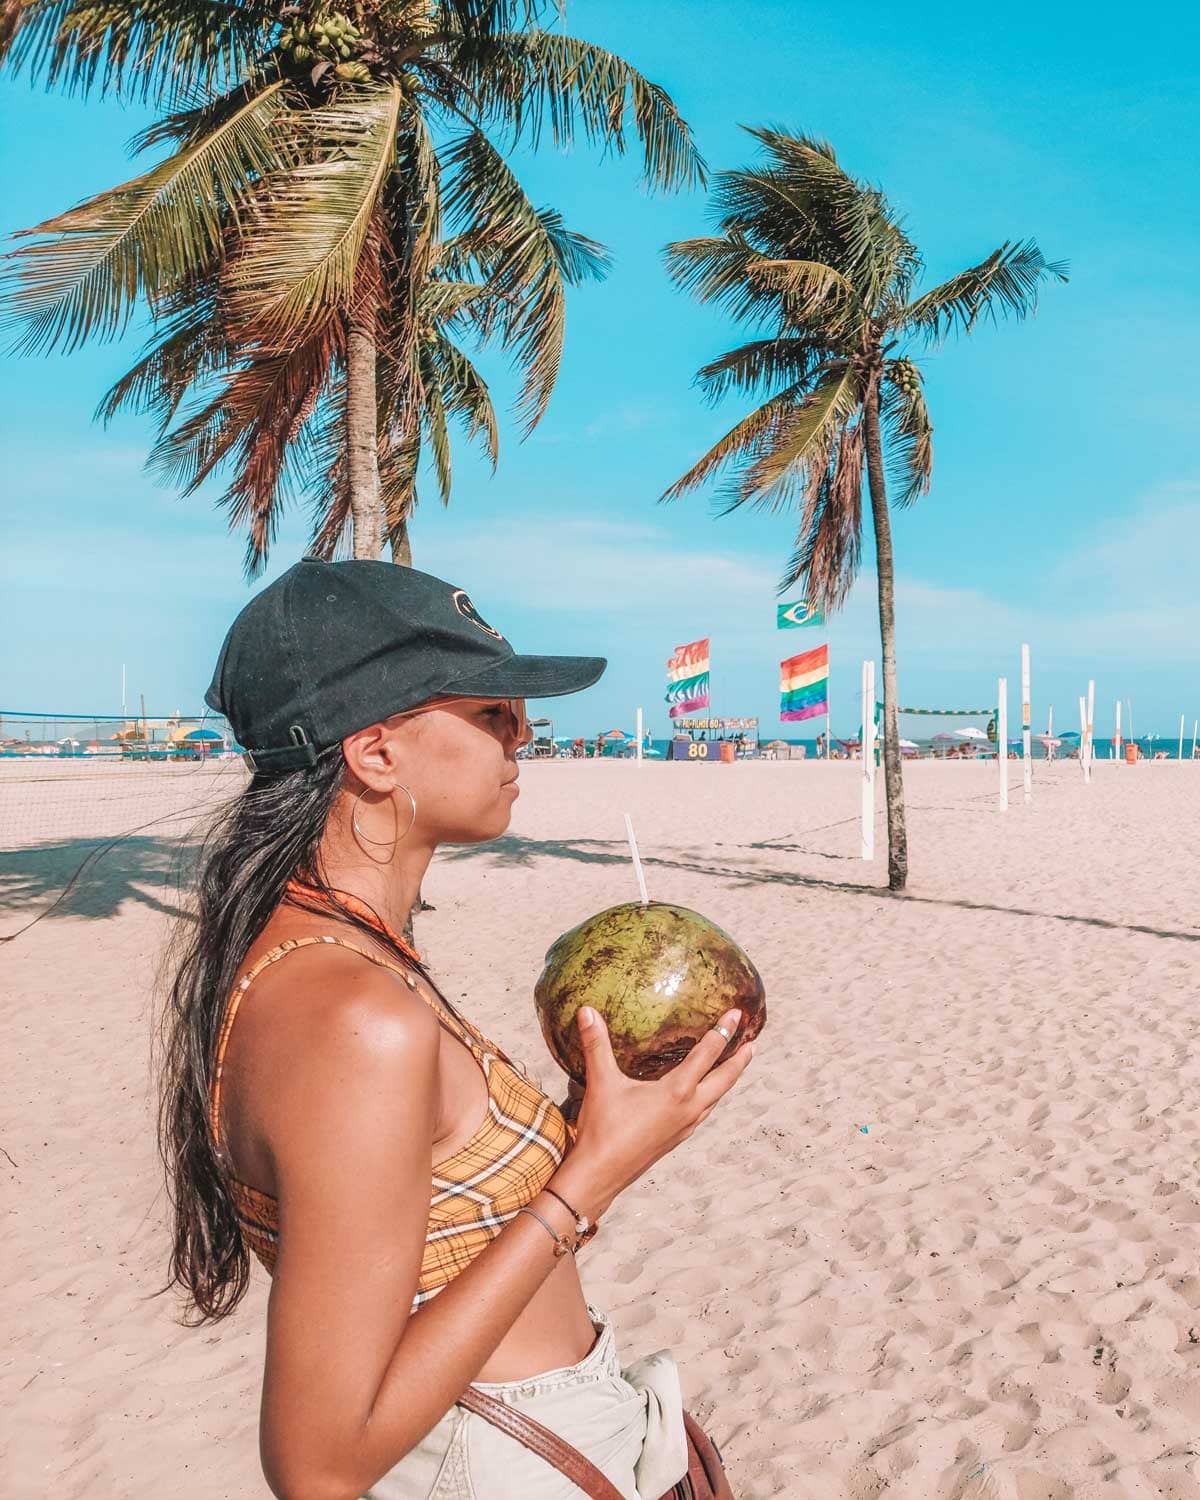 Savoring tropical flavors, a person stands on the sandy shores of Rio de Janeiro, holding a fresh coconut with a straw, with palm trees swaying above and the vibrant hues of beach umbrellas and flags in the background, capturing the essence of a relaxing day at the beach.